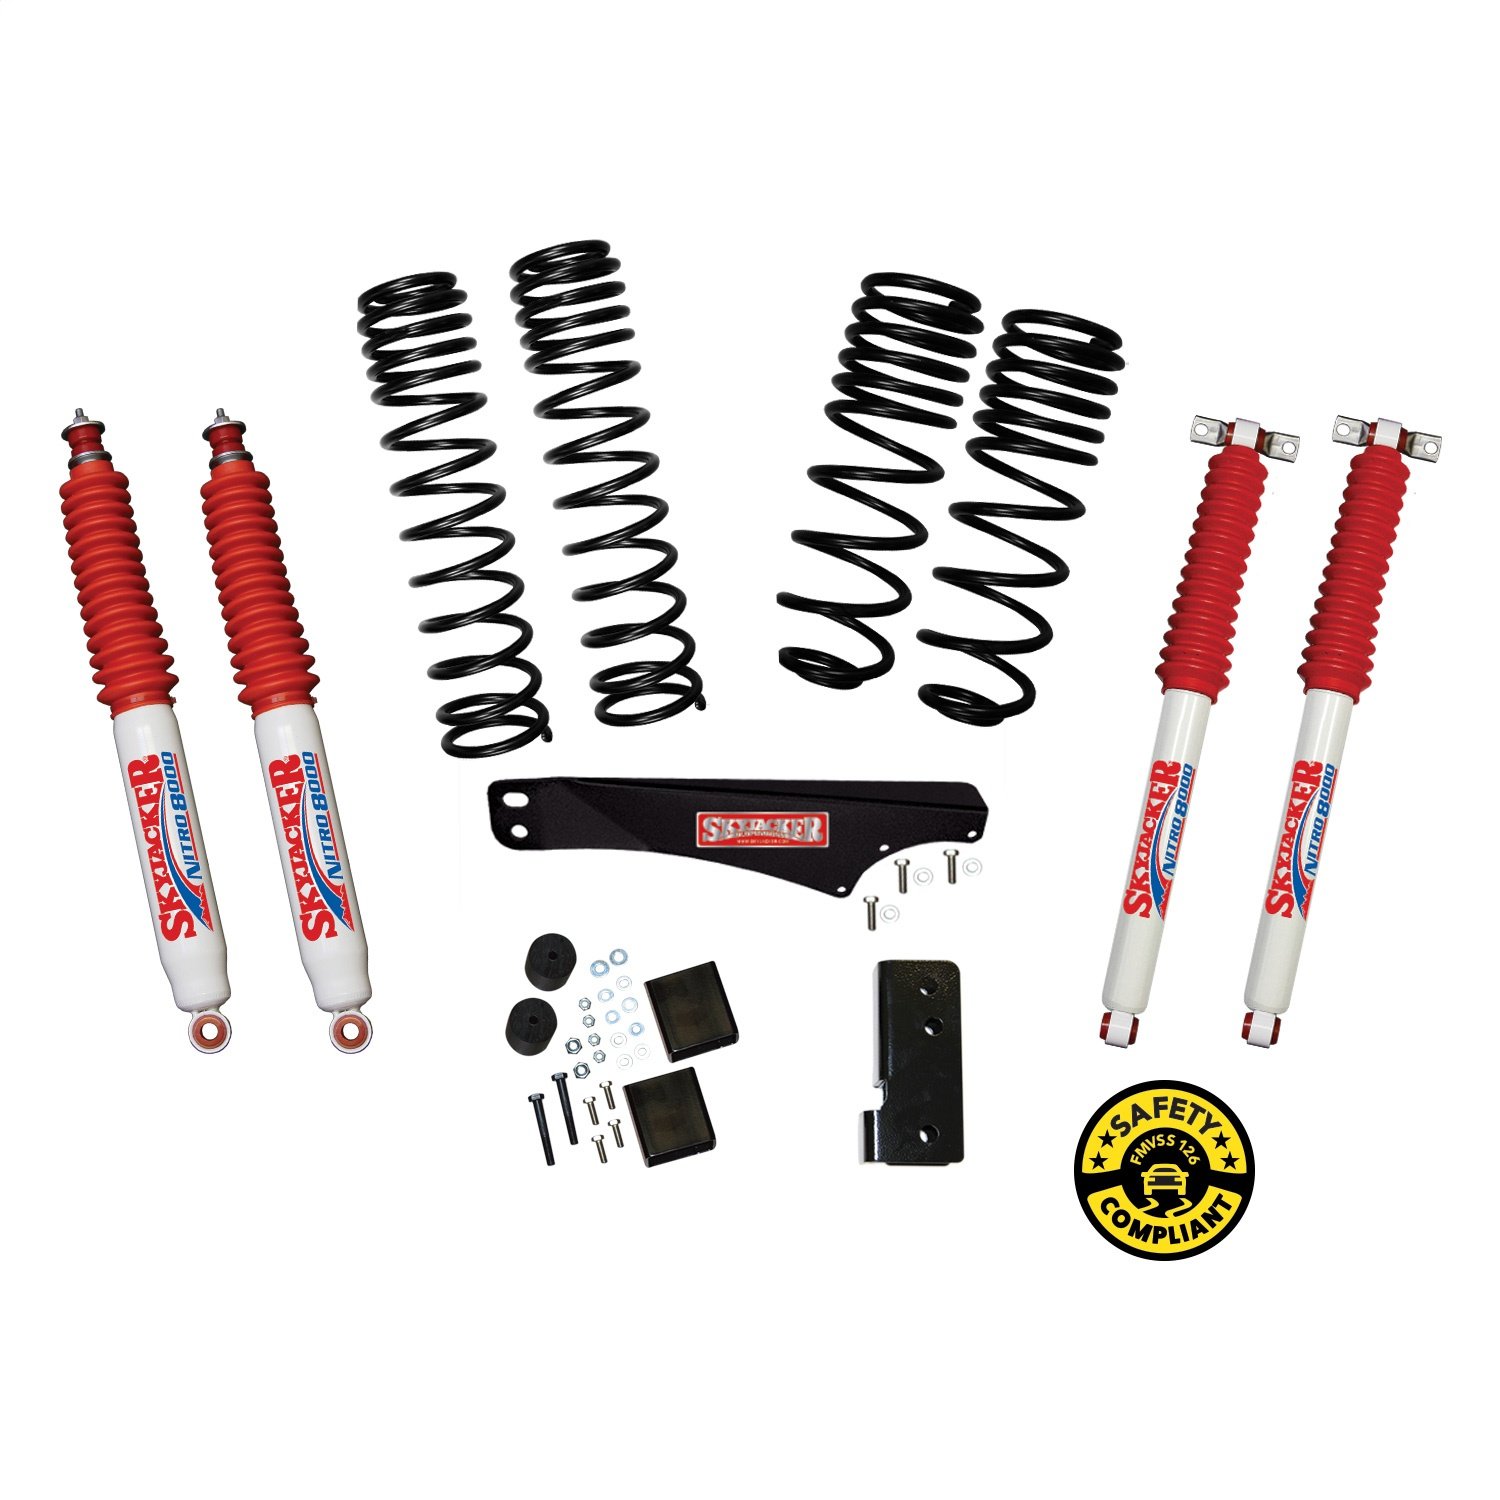 JK25BPNLT Front and Rear Suspension Lift Kit, Lift Amount: 2.5 in. Front/2.5 in. Rear